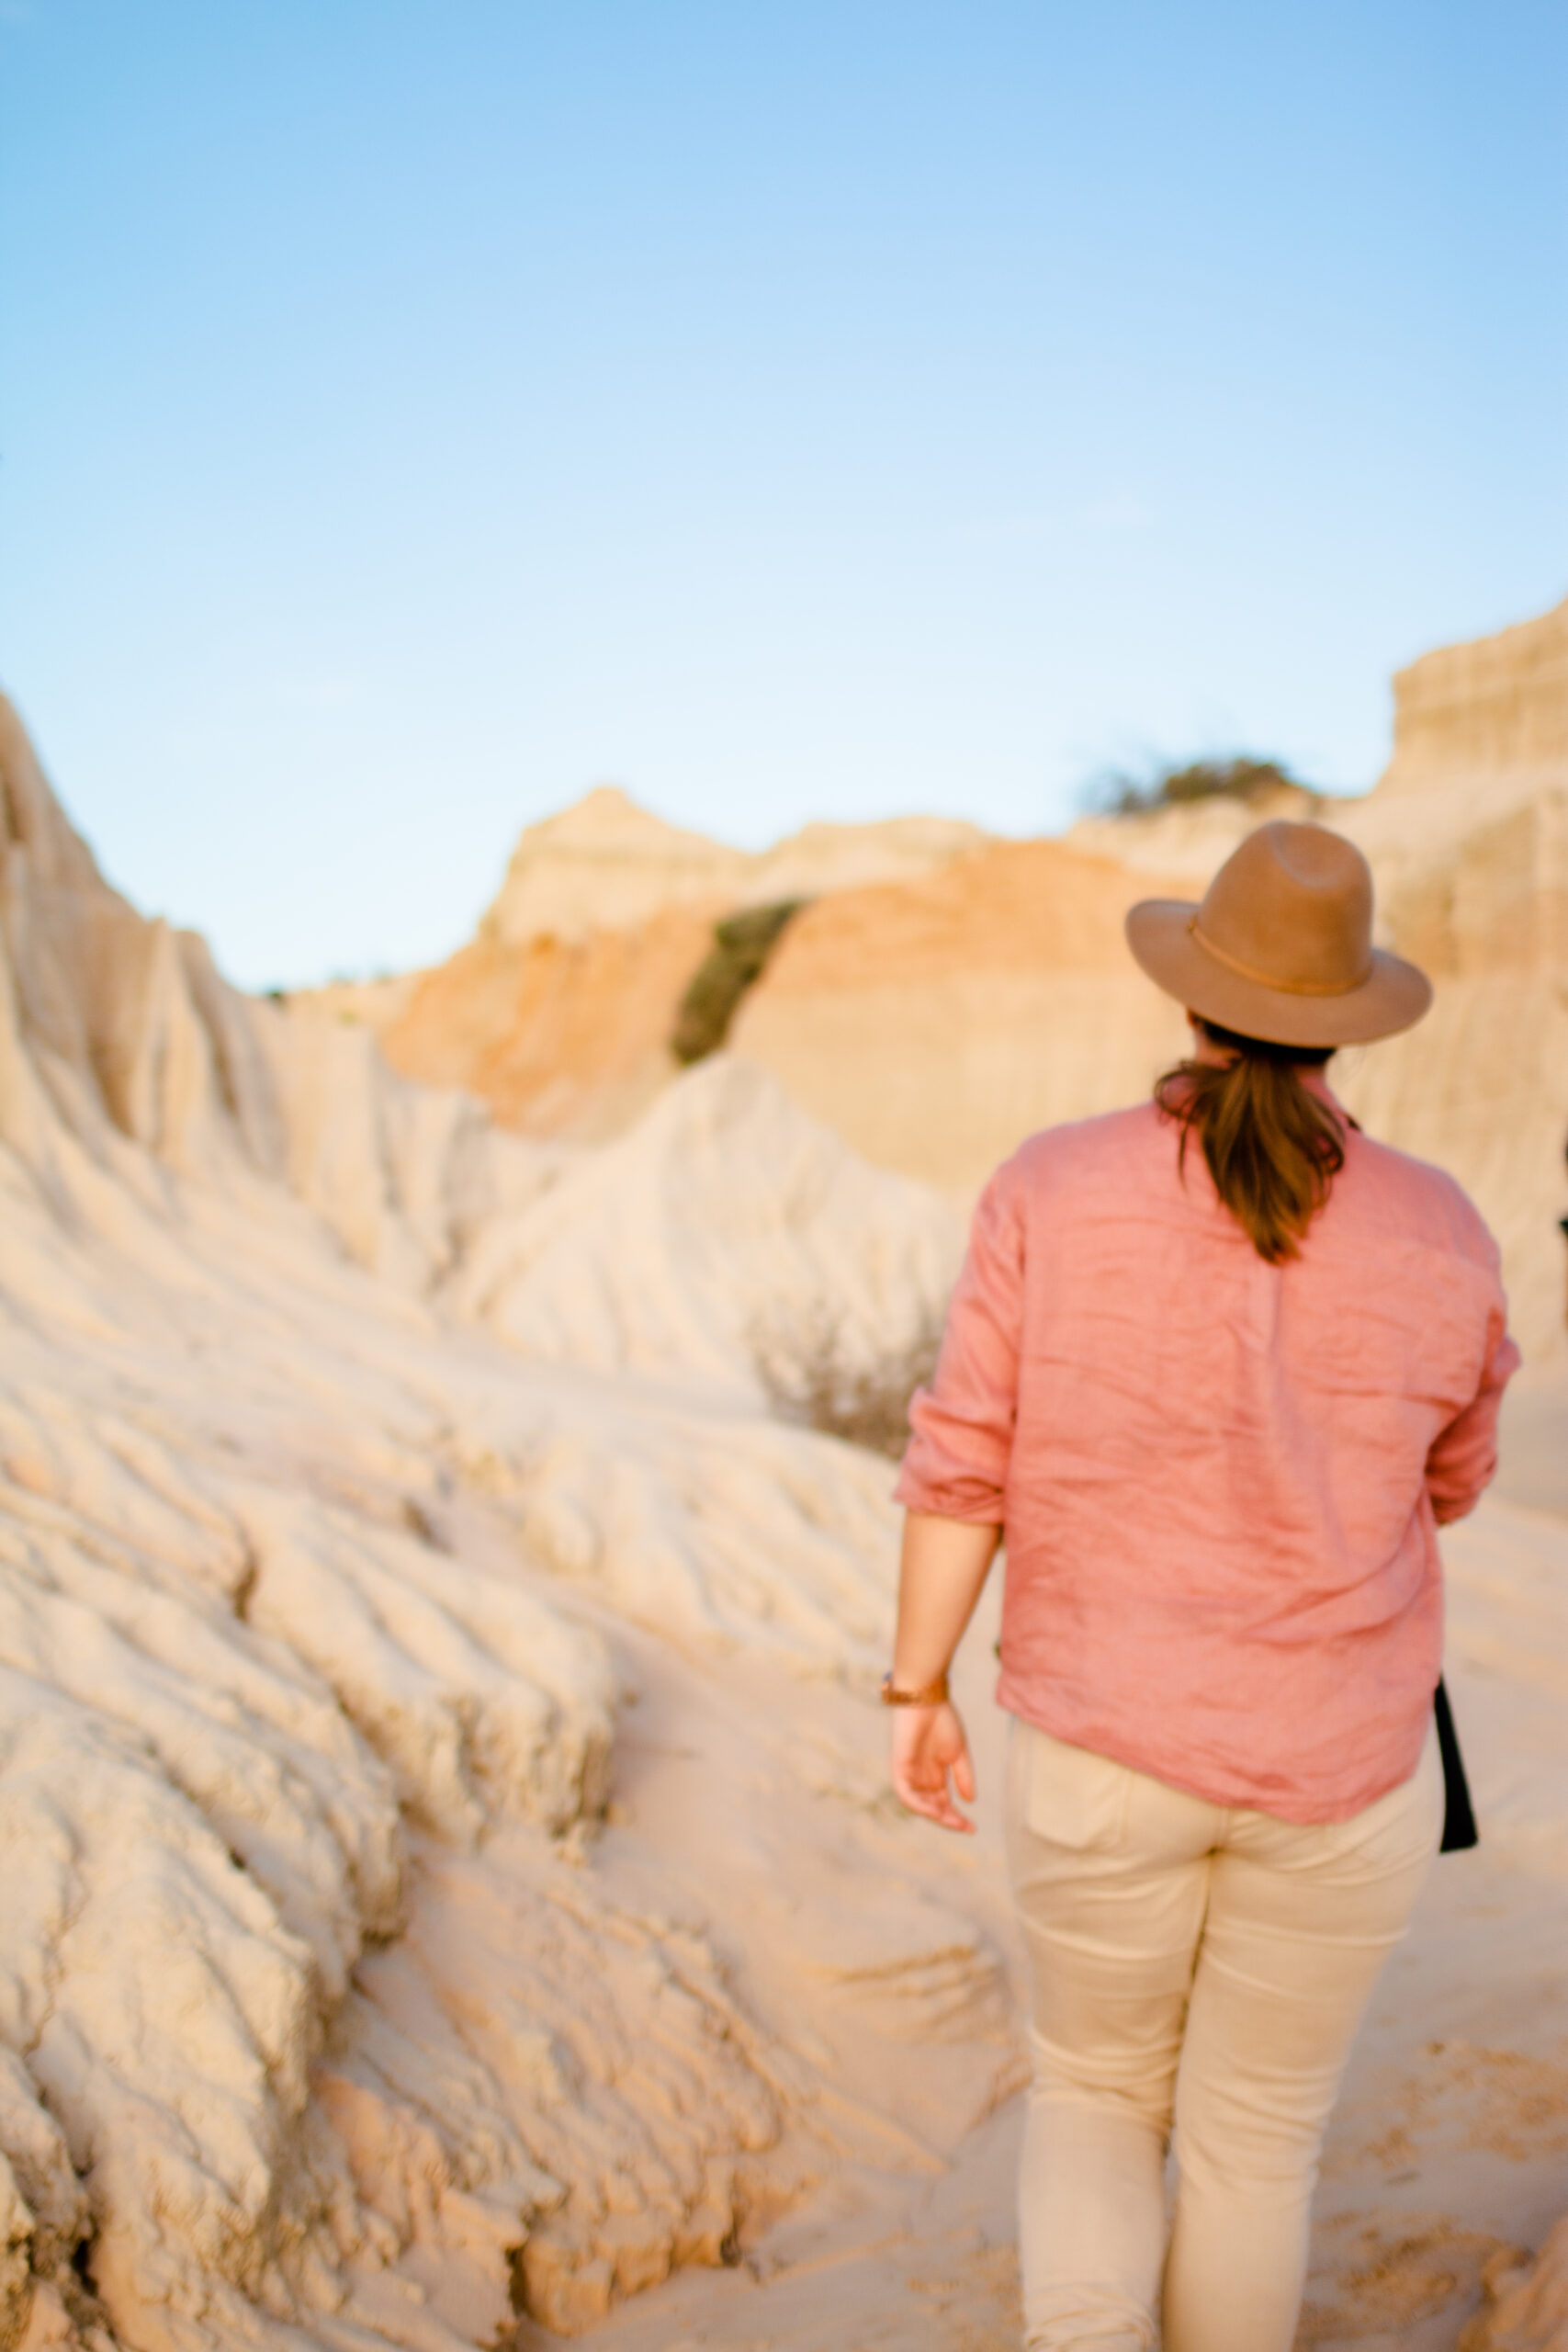 How to access mungo national park